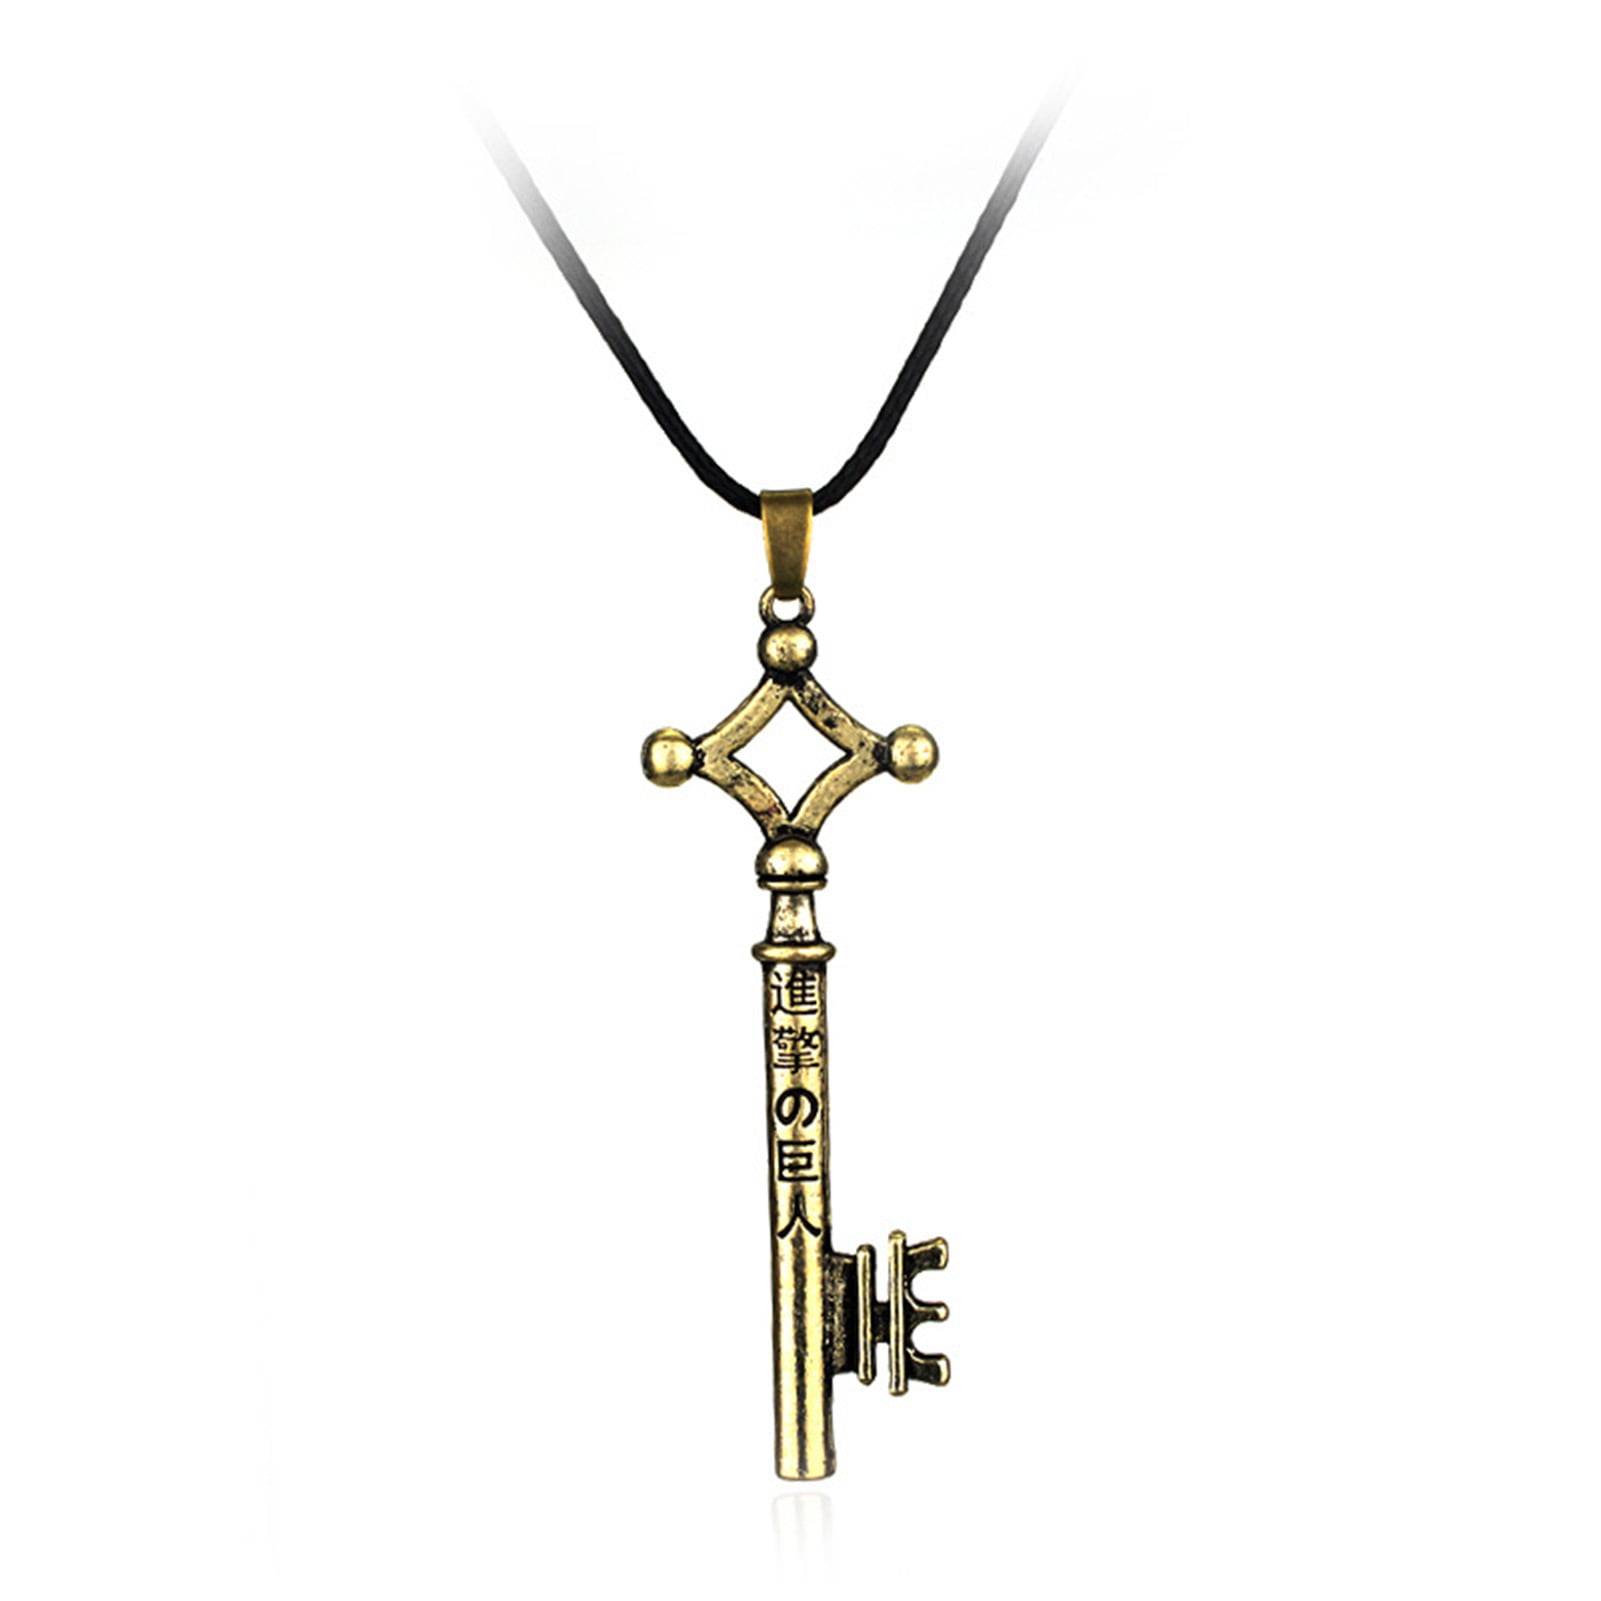 New Eren's Key Necklace Attack on Titan Anime Pendant Chains Collectable Gifts